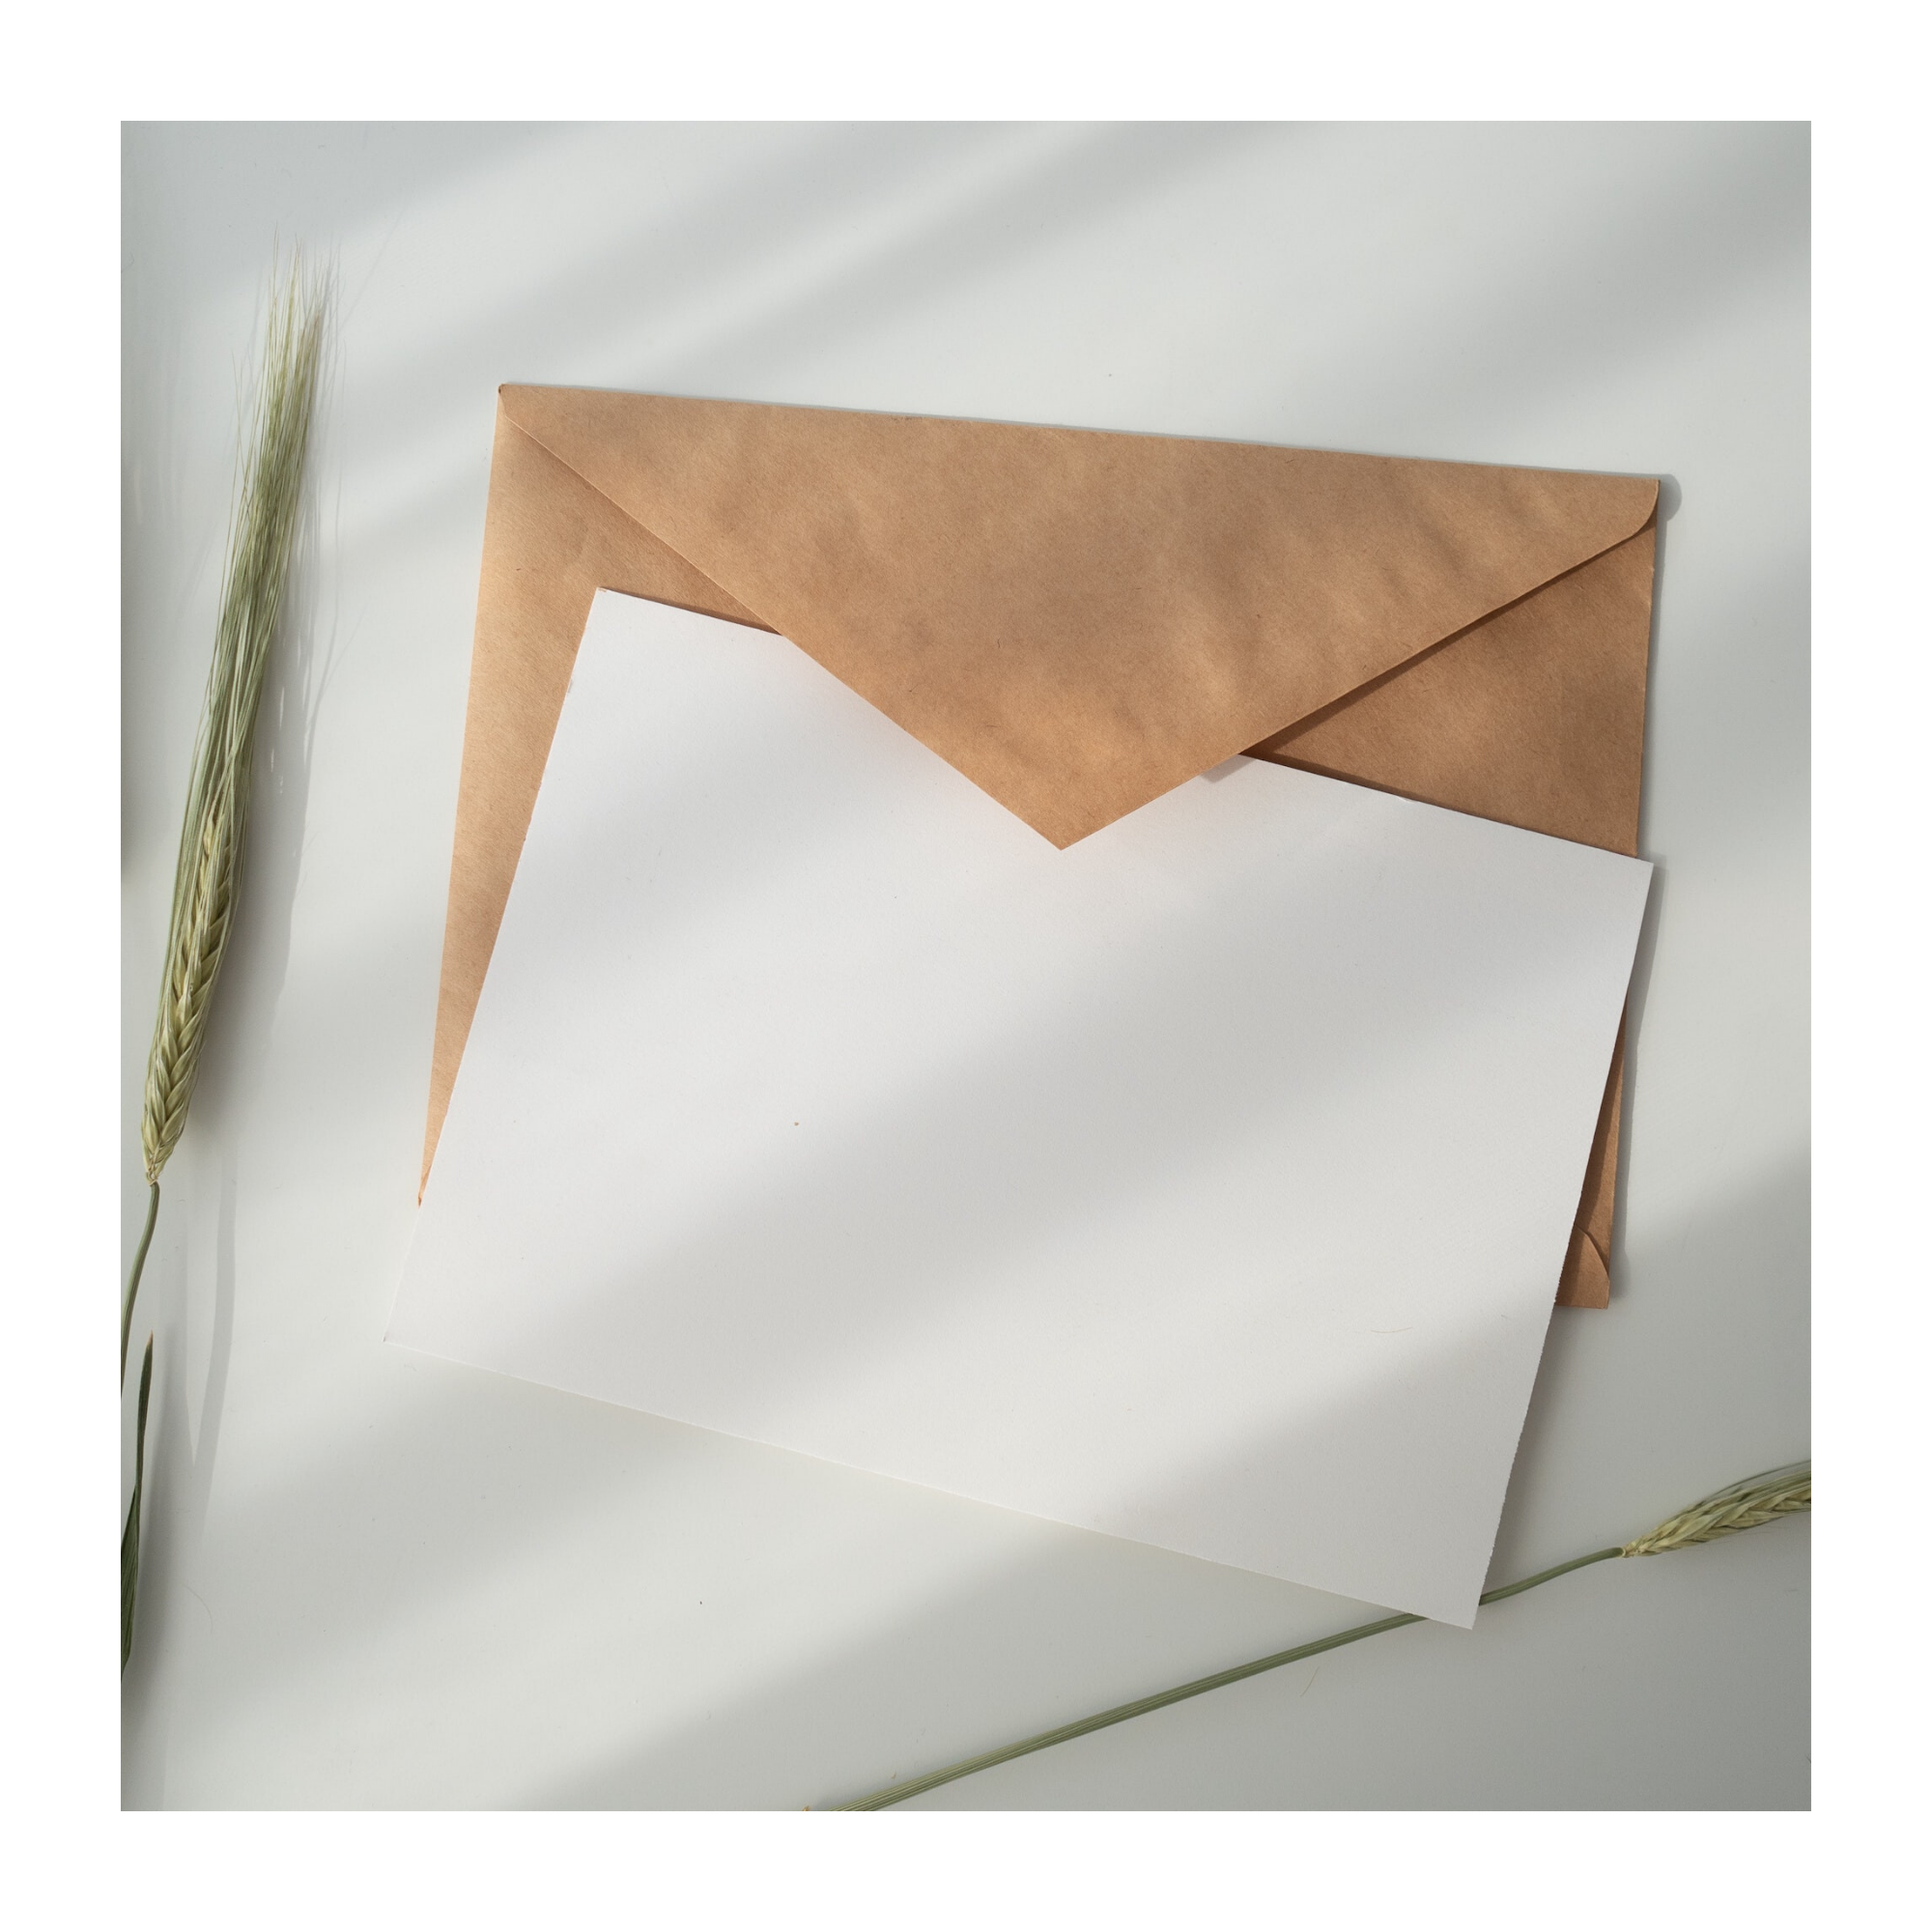 A white card and kraft brown envelope lain on a white surface.